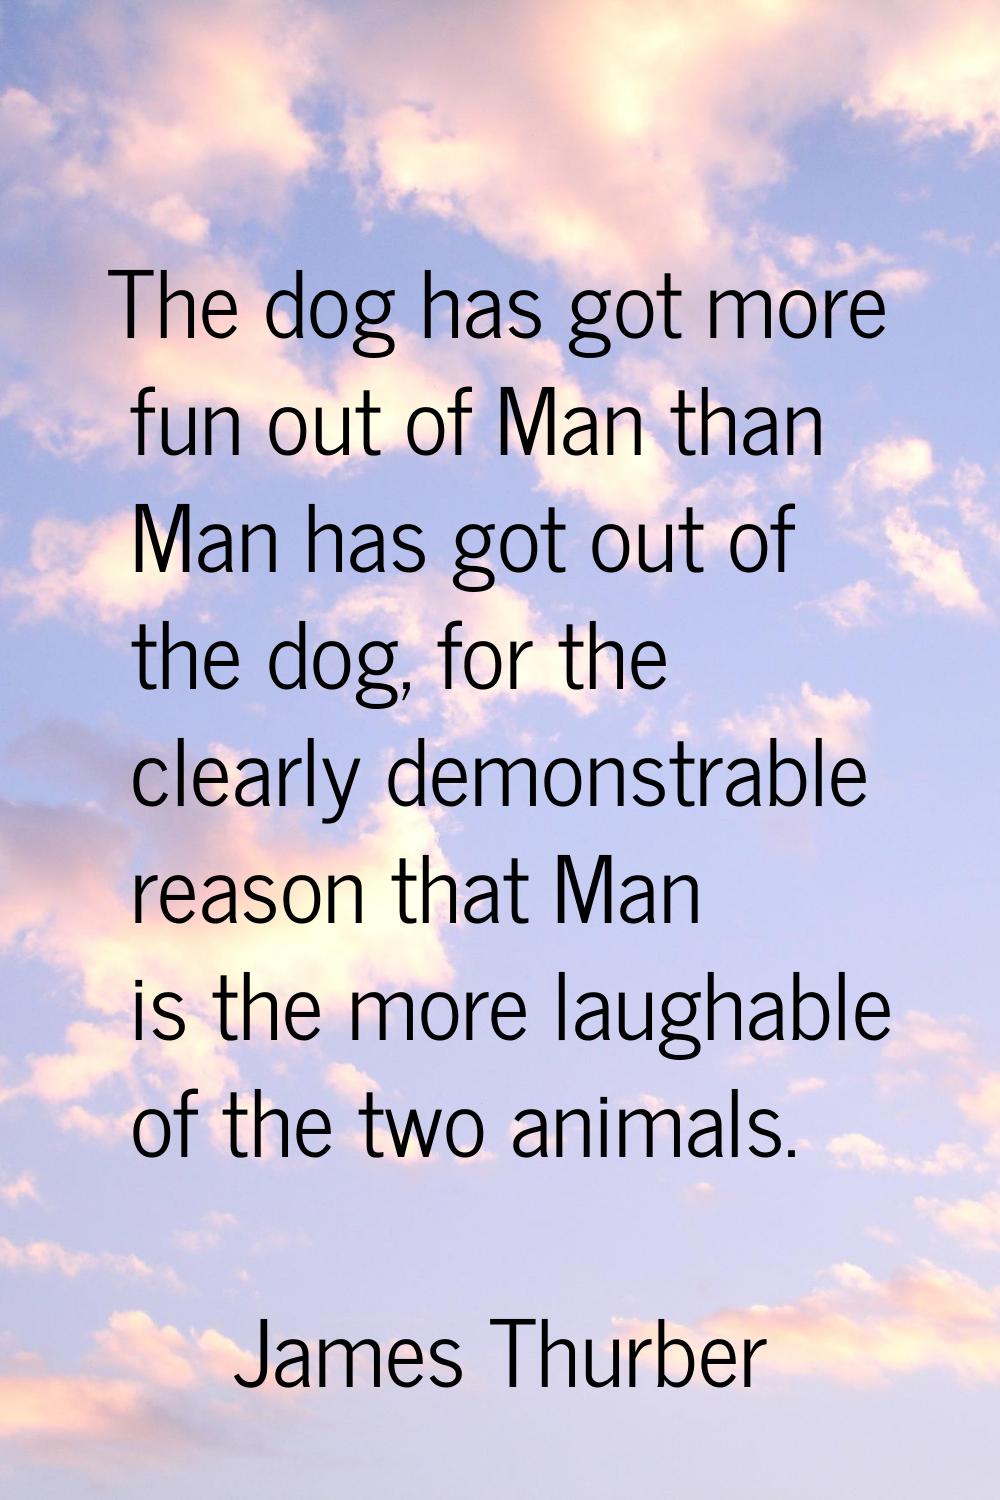 The dog has got more fun out of Man than Man has got out of the dog, for the clearly demonstrable r